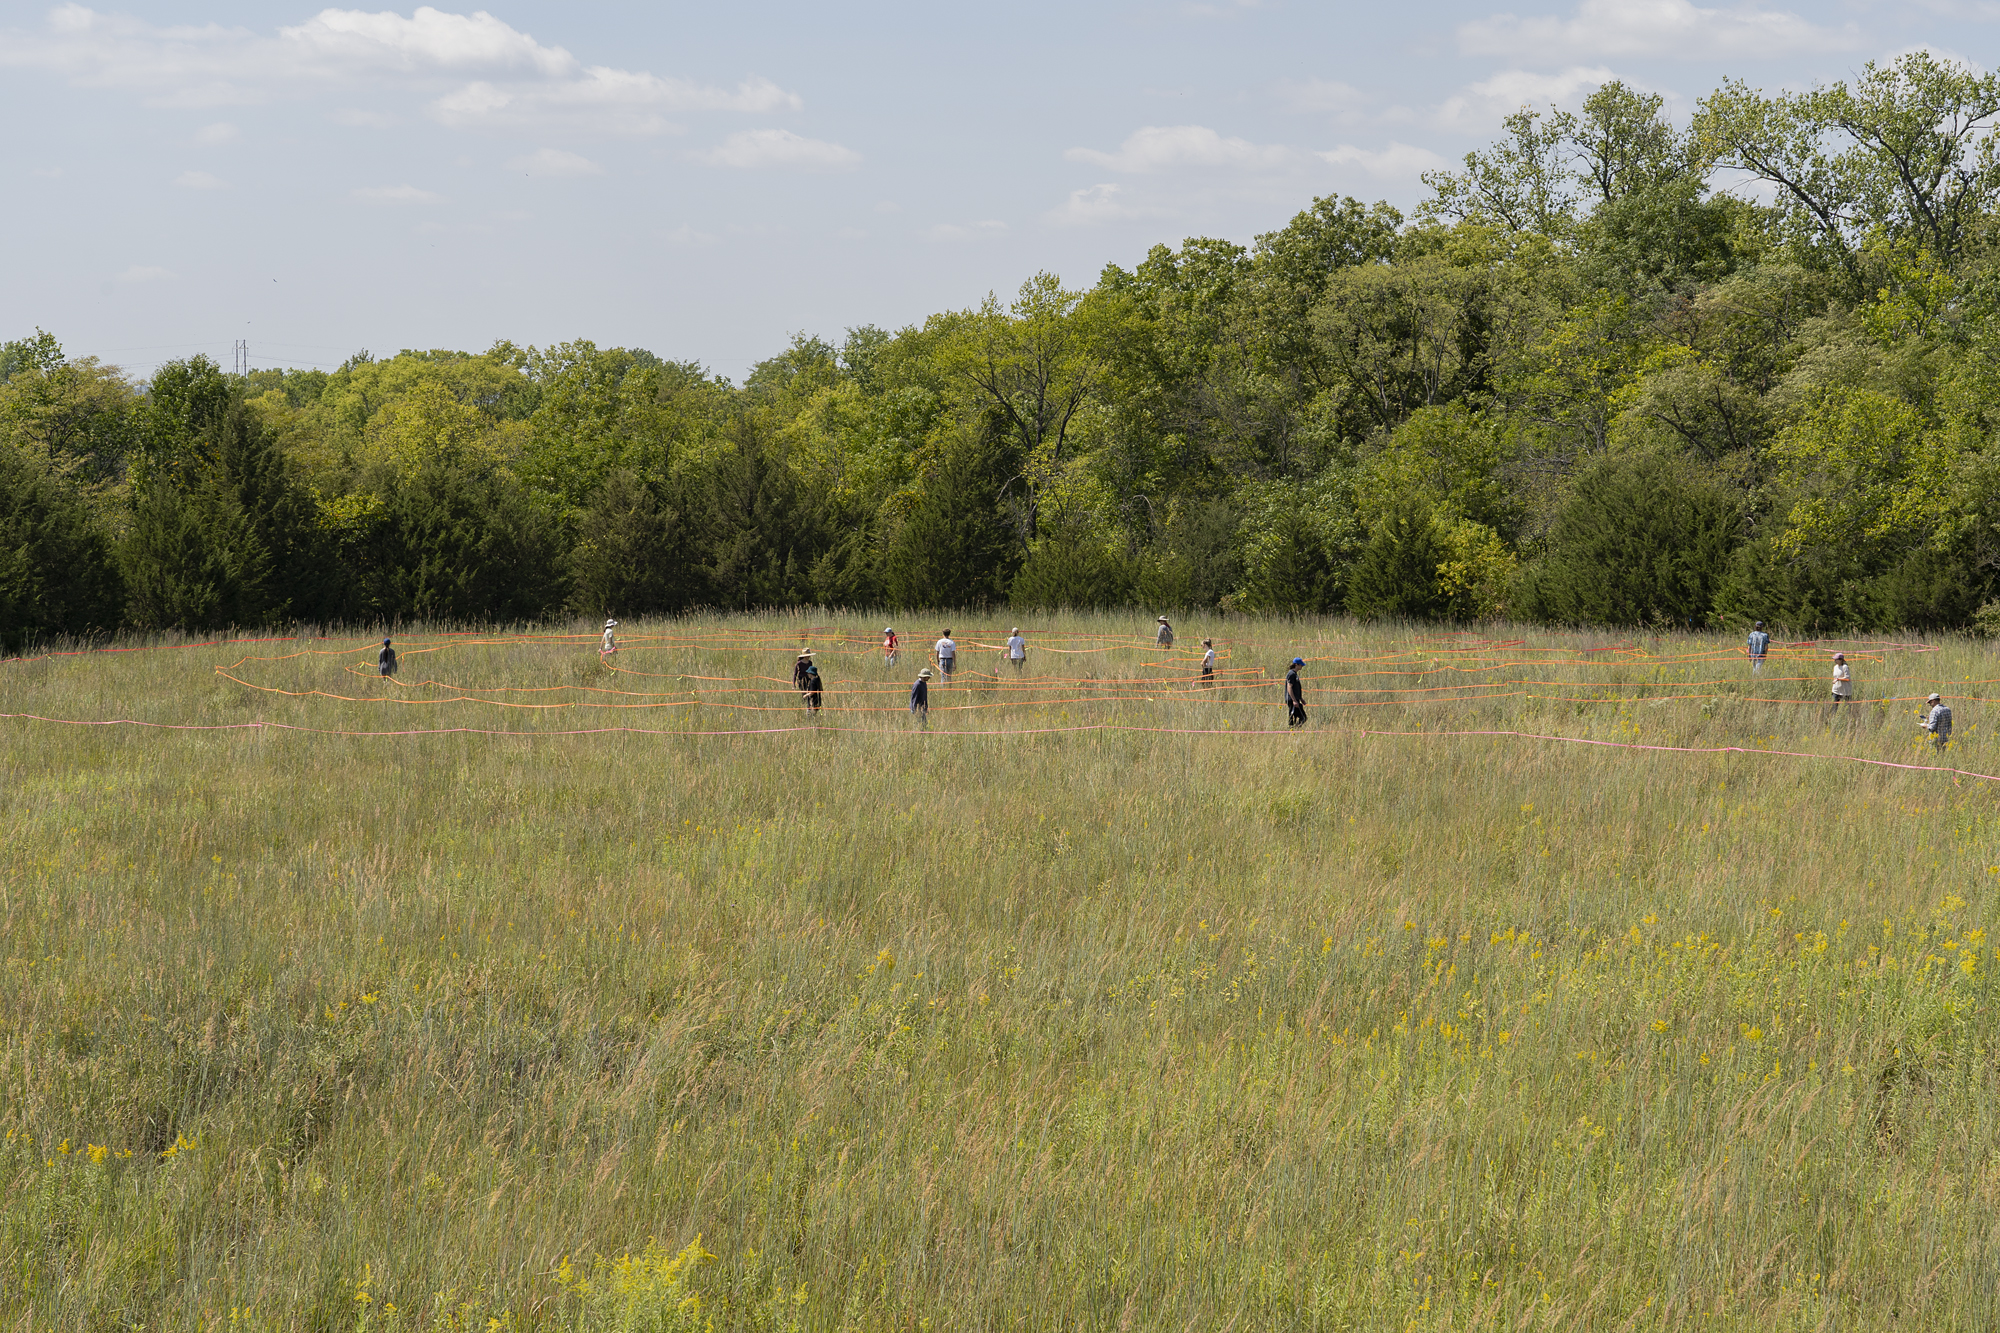 A group of people walk along a path in a field of tall, green grass